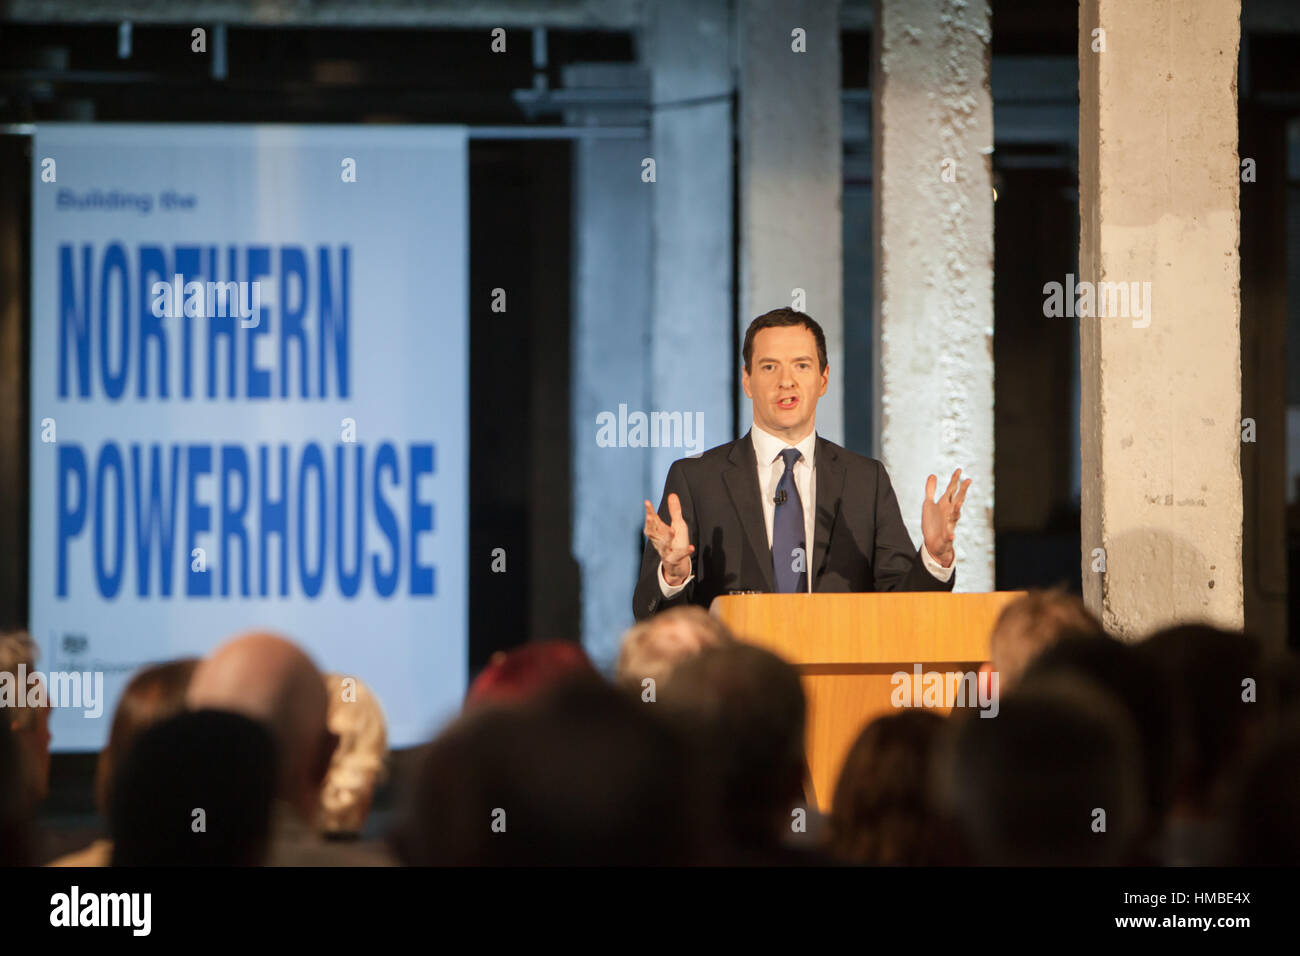 George Osborne's speech on the creation of the Northern Powerhouse. Held in Manchester at the Victoria Warehouse. Stock Photo